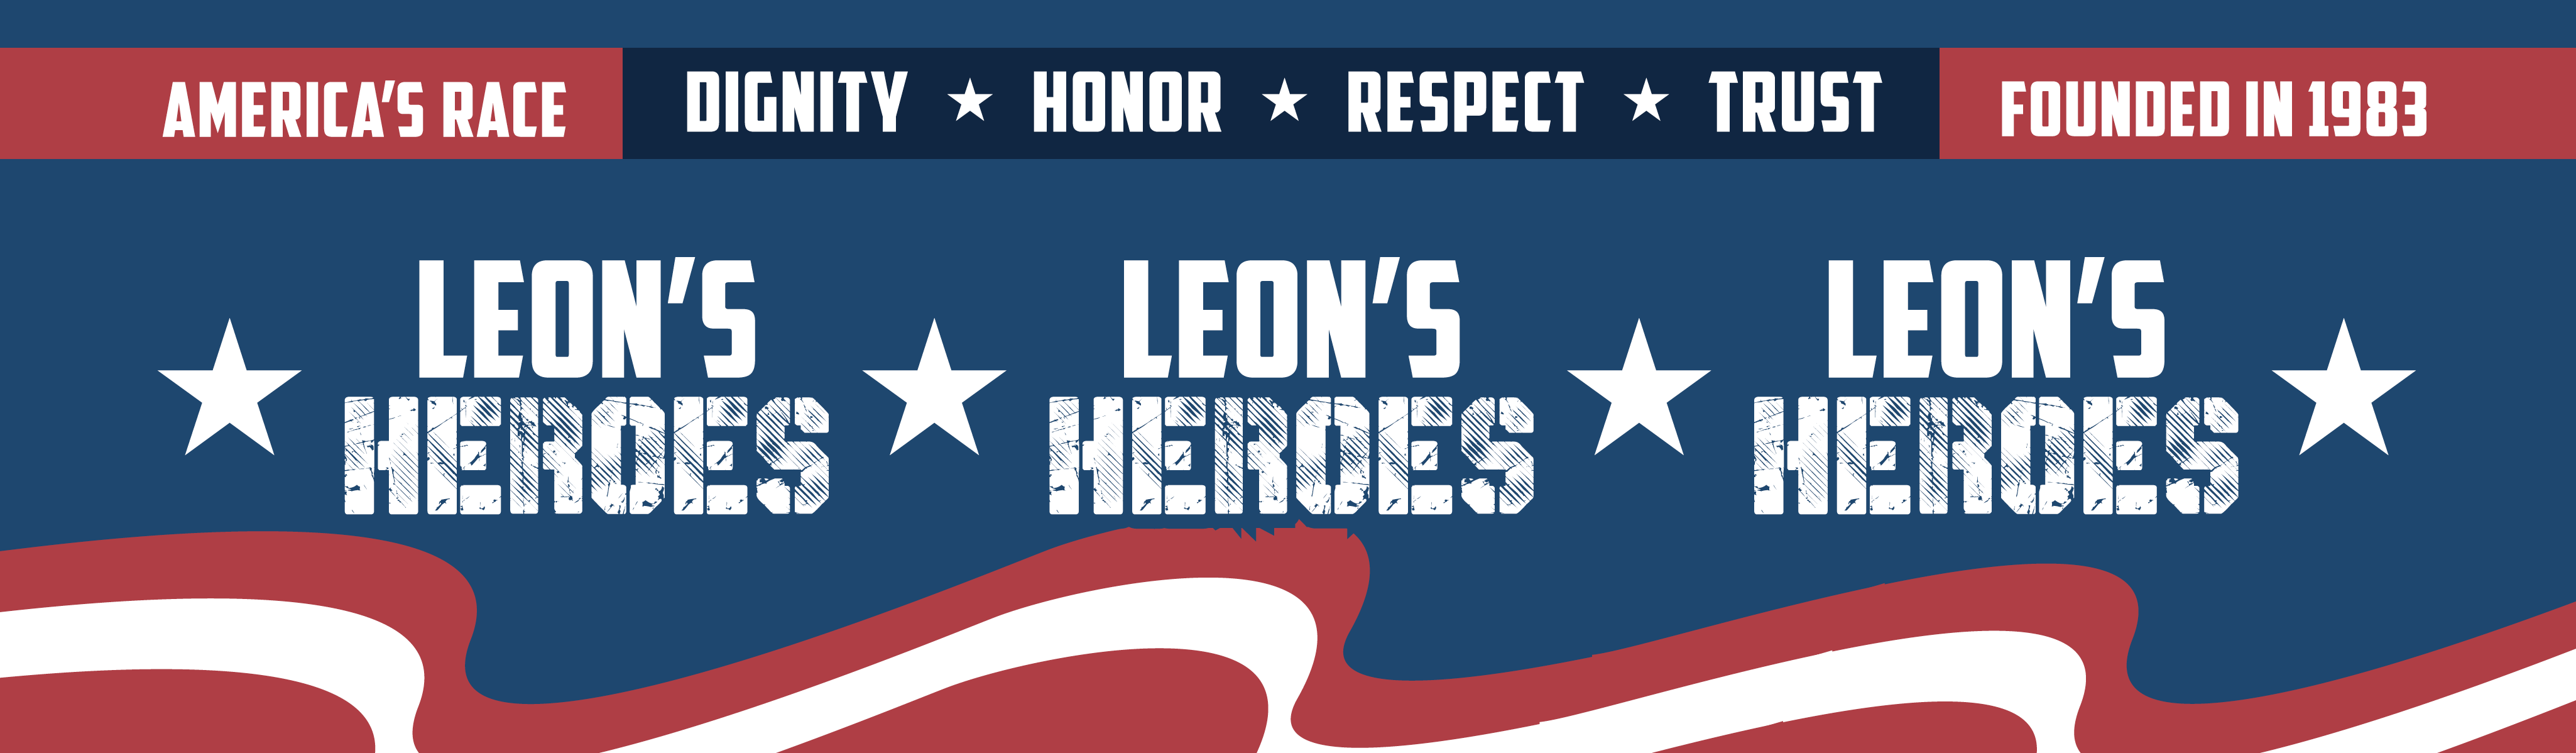 Leon's Heroes Banner for America's Race